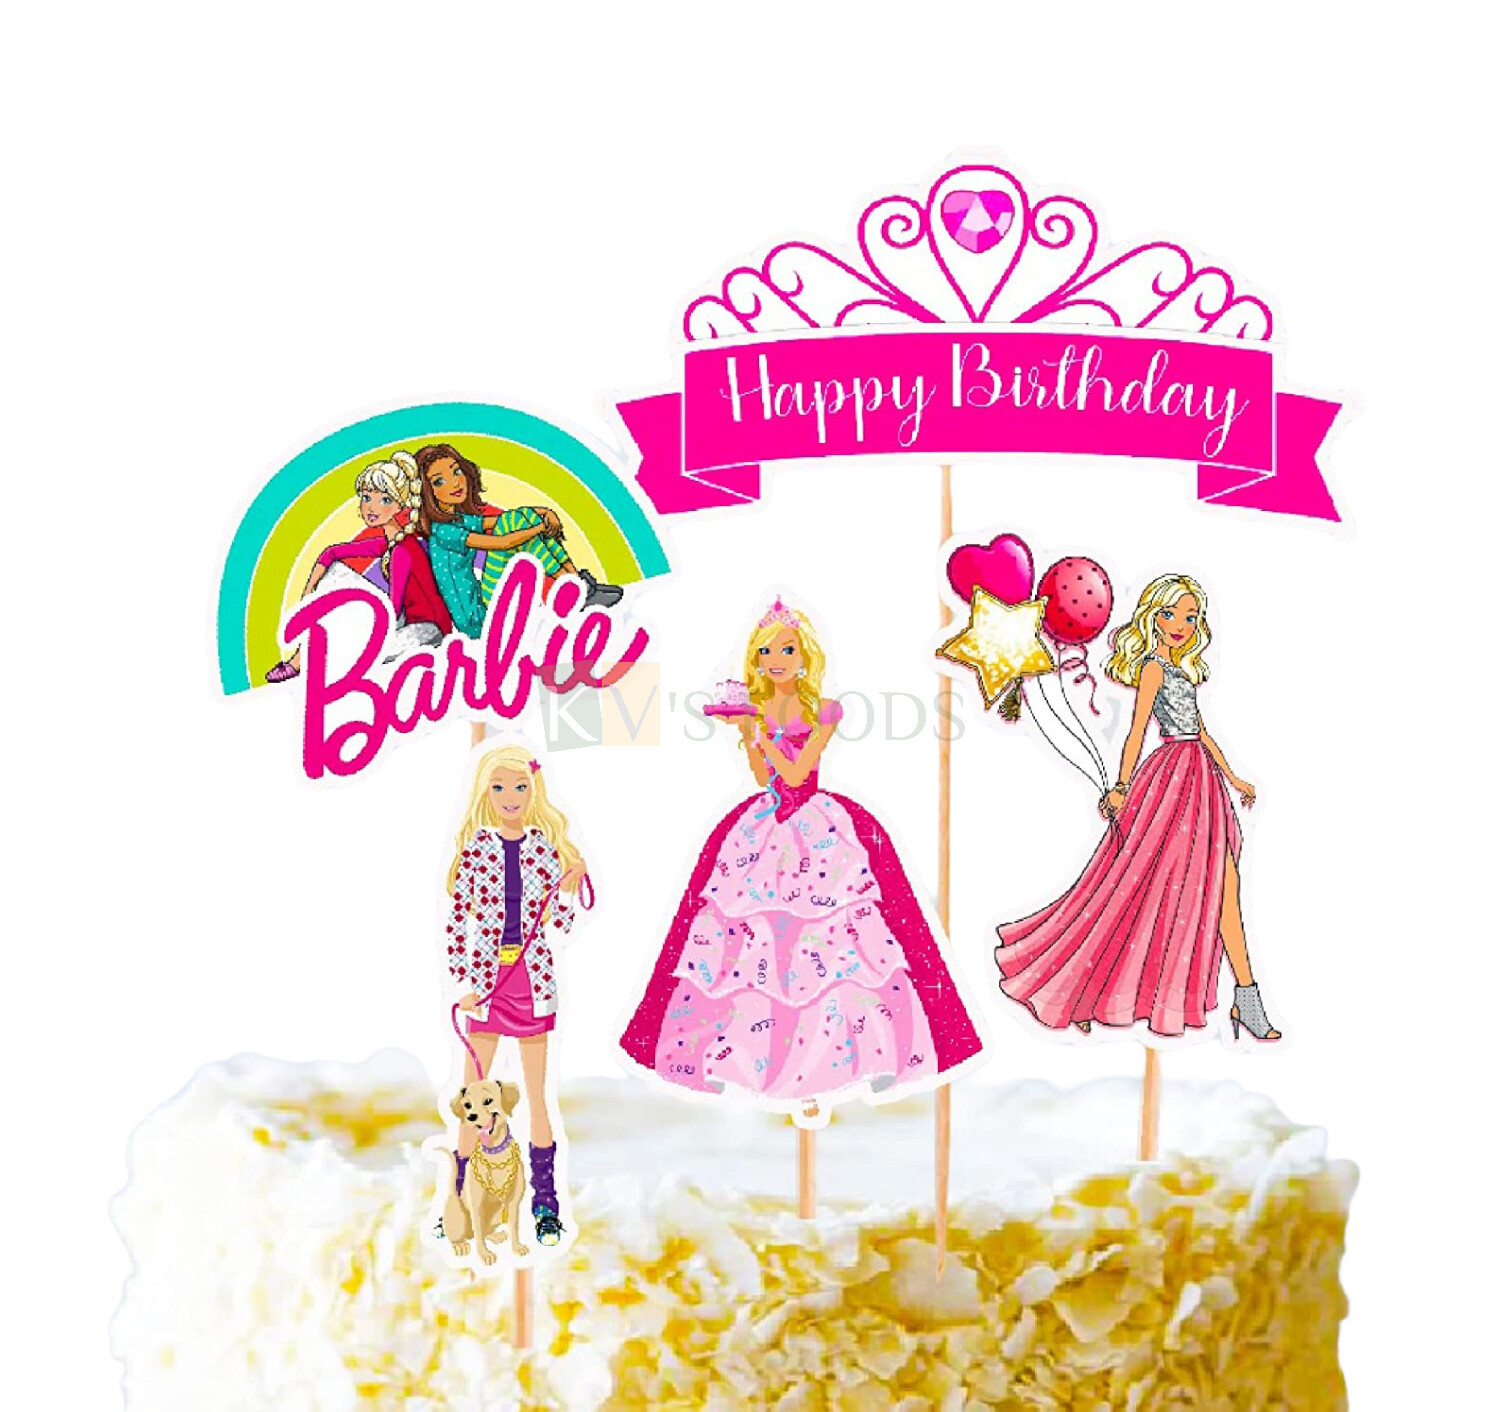 6 PC Barbie Doll Theme, Cake Topper Insert, Cake Topper, Cupcake Toppers Bday, Girl's, Friends Bday Decorations Items/Cake Accessories, Tags, Cards, Cake Toothpick Topper